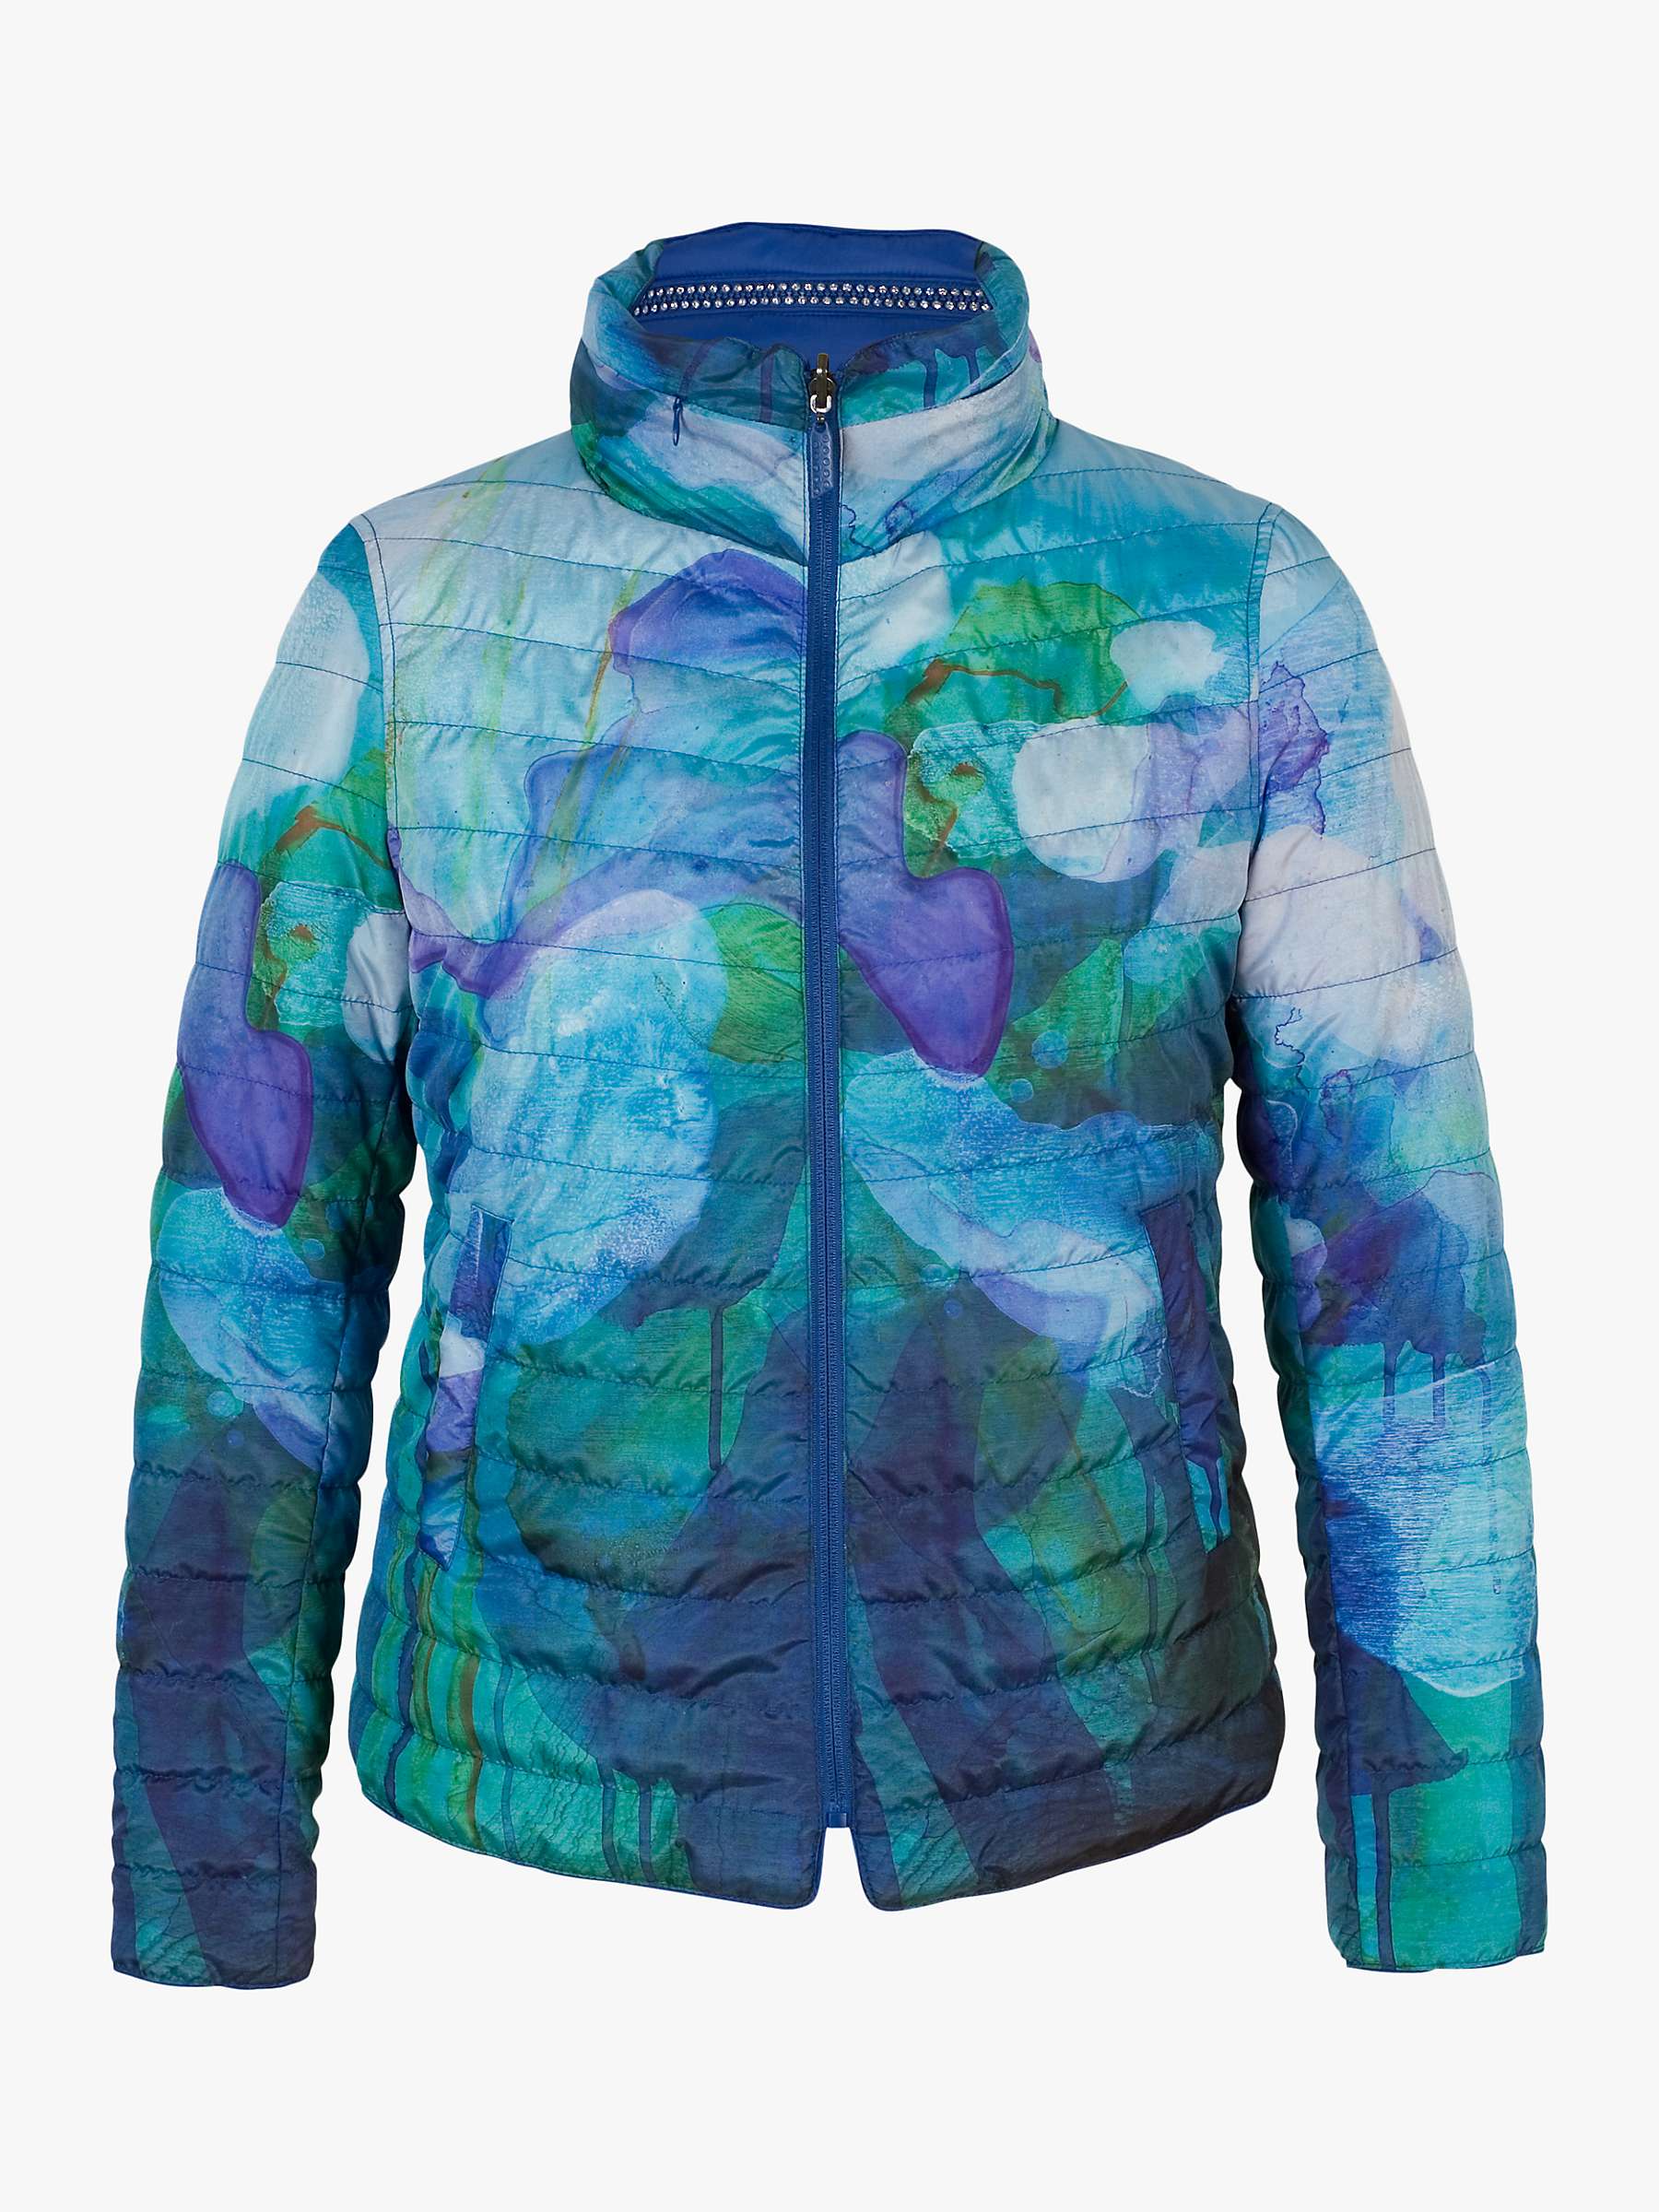 Buy chesca Quilted Reversible Abstract Jacket, Cobalt Online at johnlewis.com